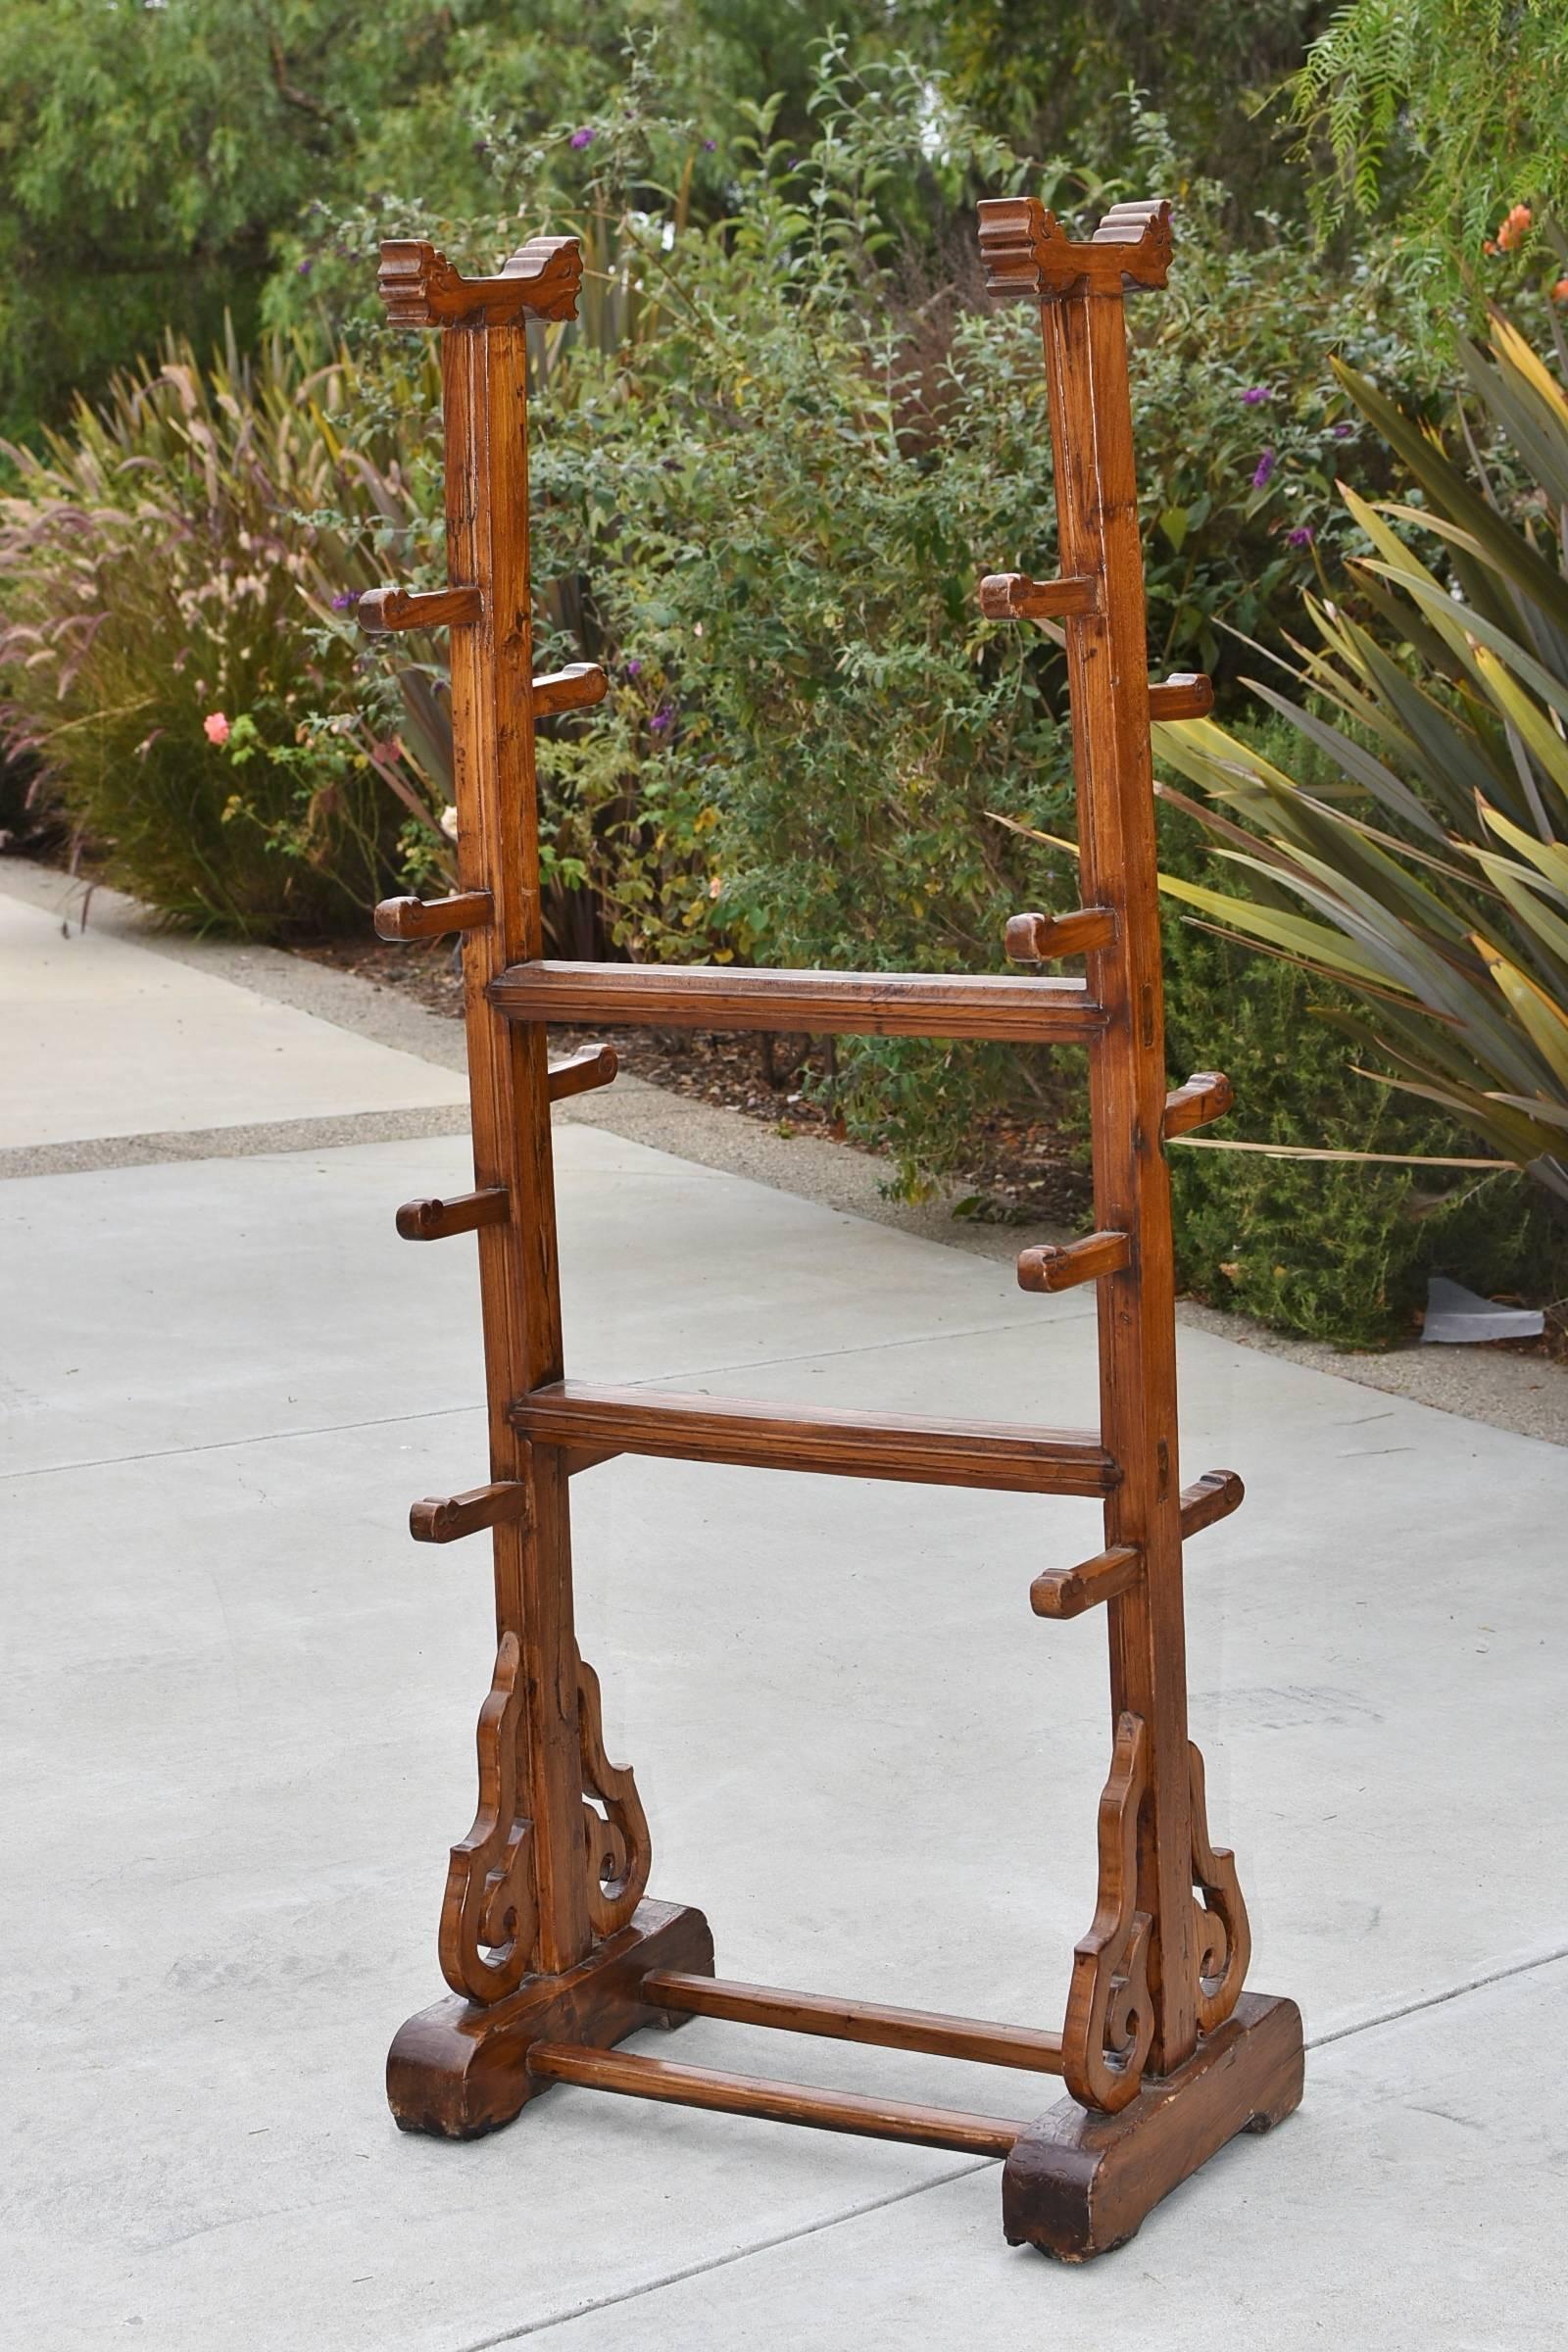 A rare offering. This is a republic era solid wood stand that is designed to hold swords, baton and similar equipment. The stand has stylized dragons on top and its protruding holders. Beautiful curved carvings decorate the base. This is also a